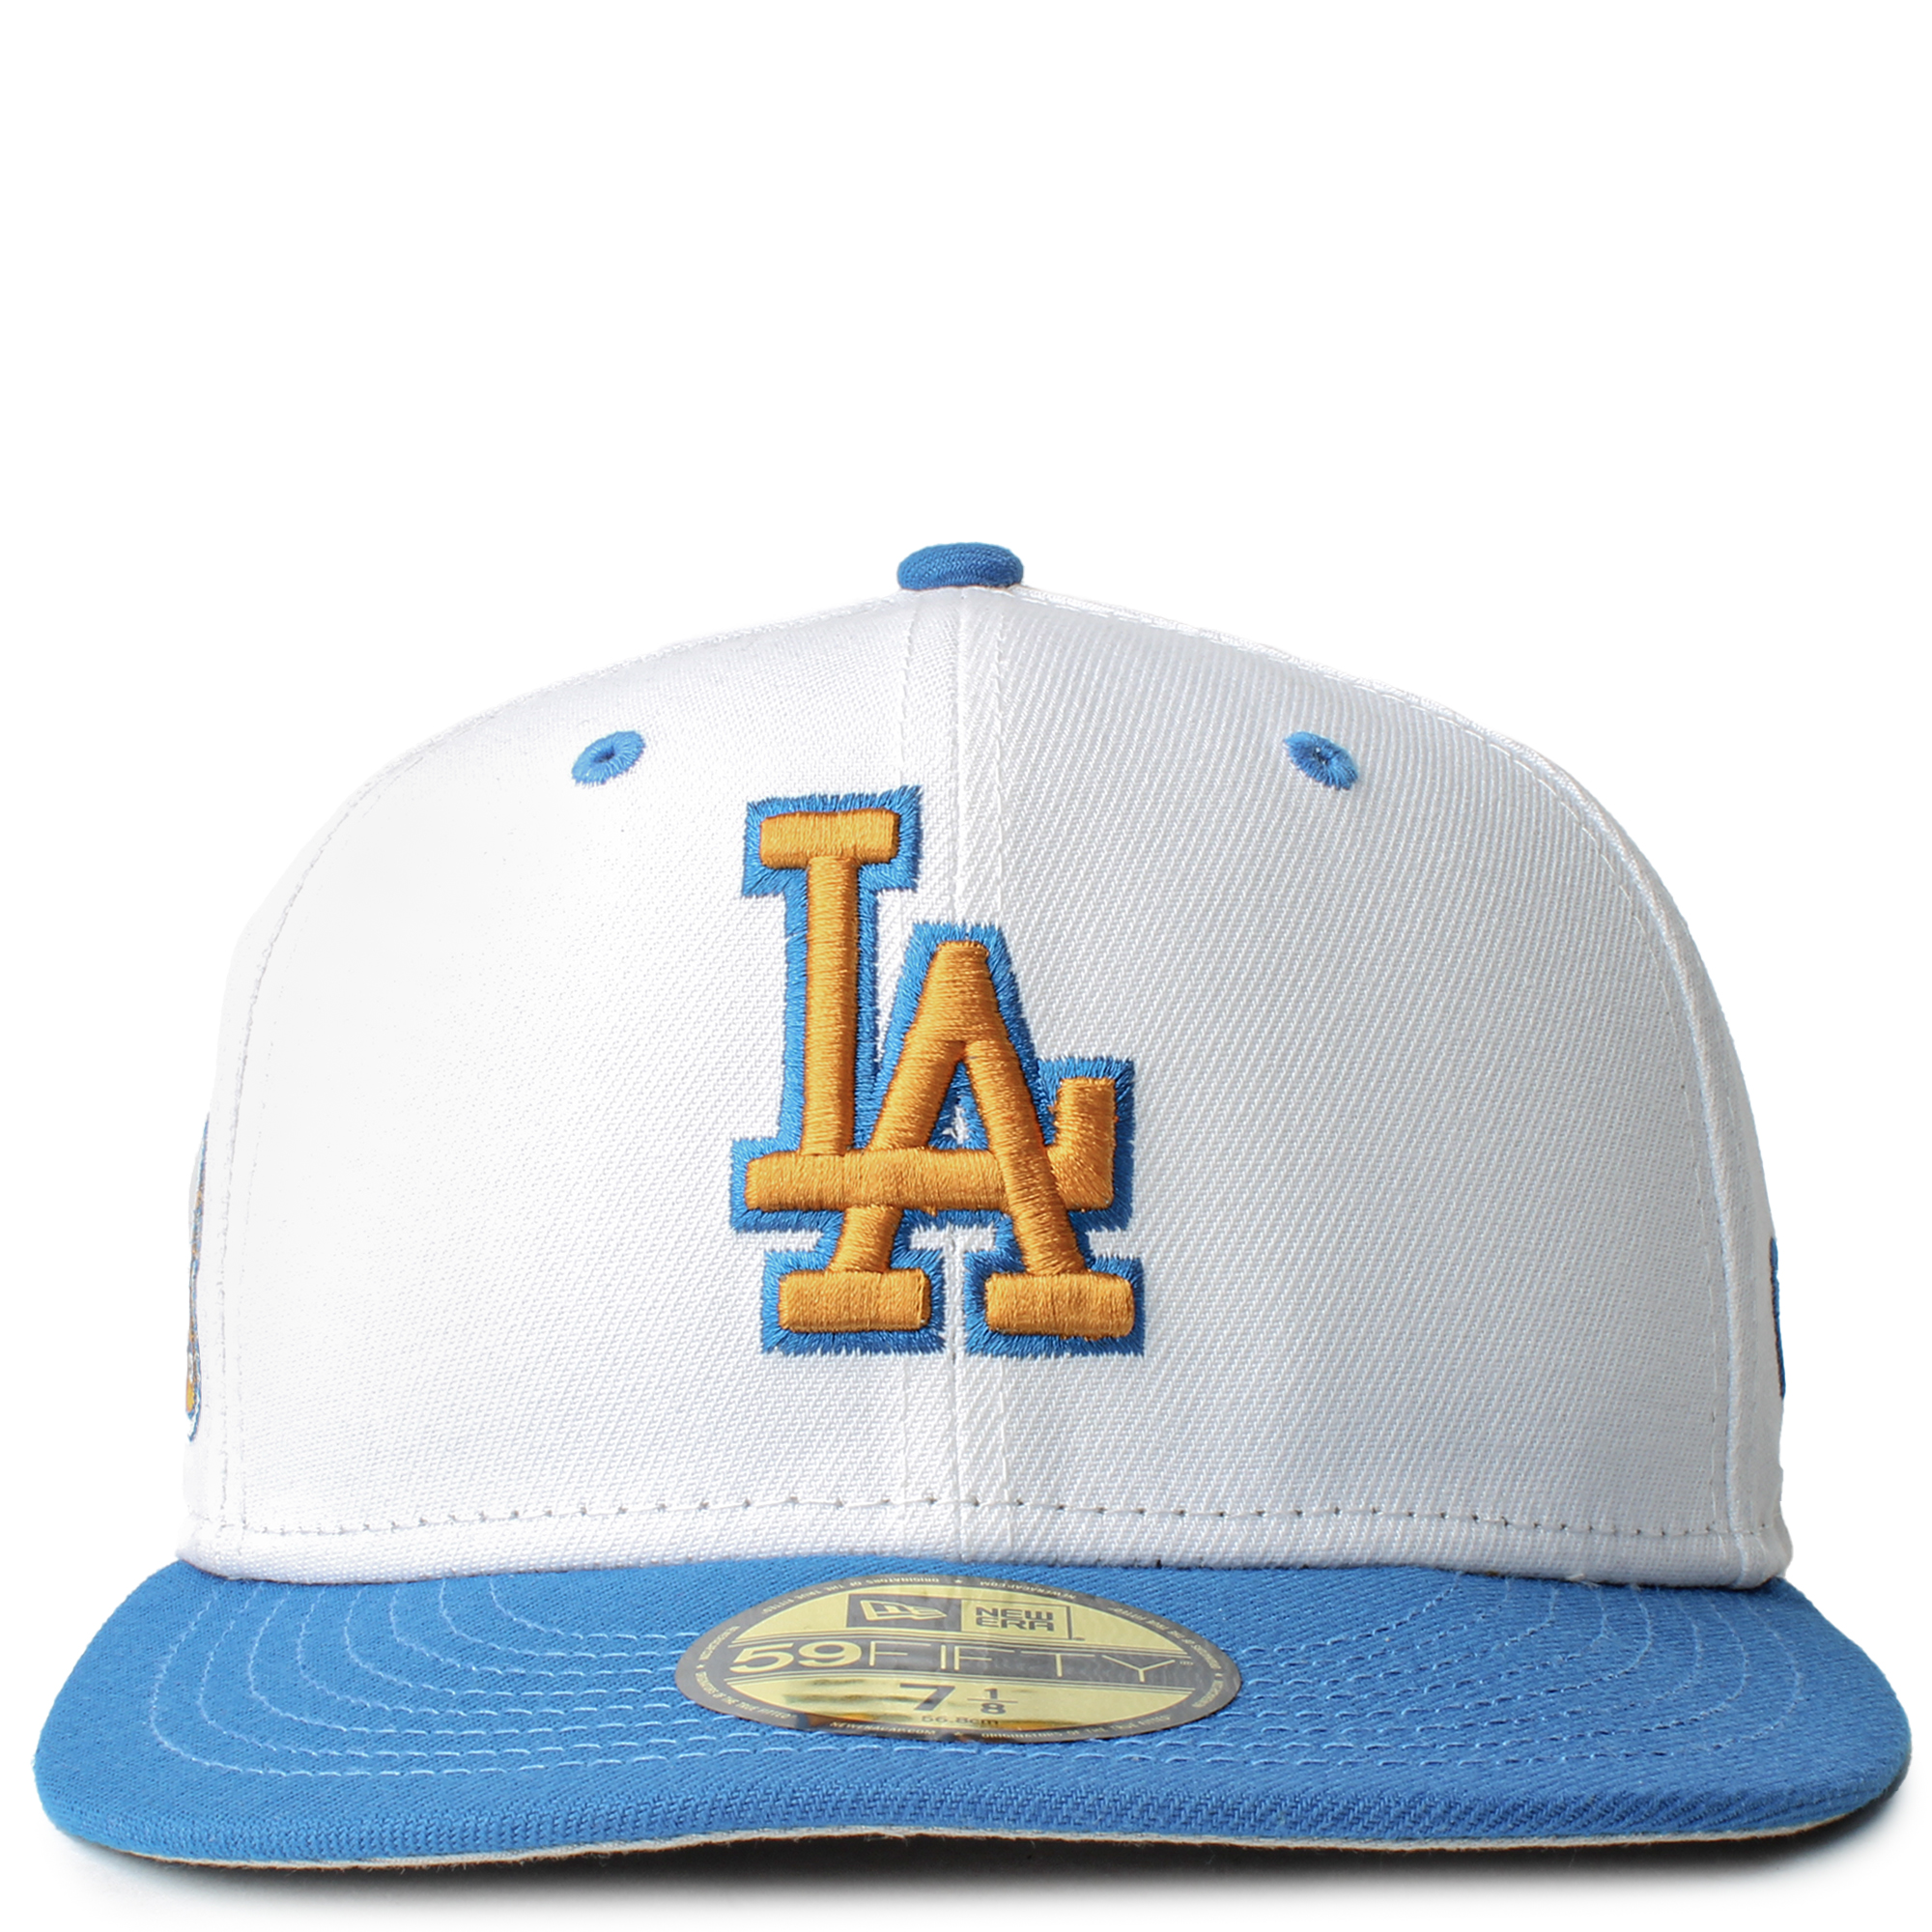 New Era Caps Los Angeles Dodgers 59FIFTY Fitted Hat White/Blue